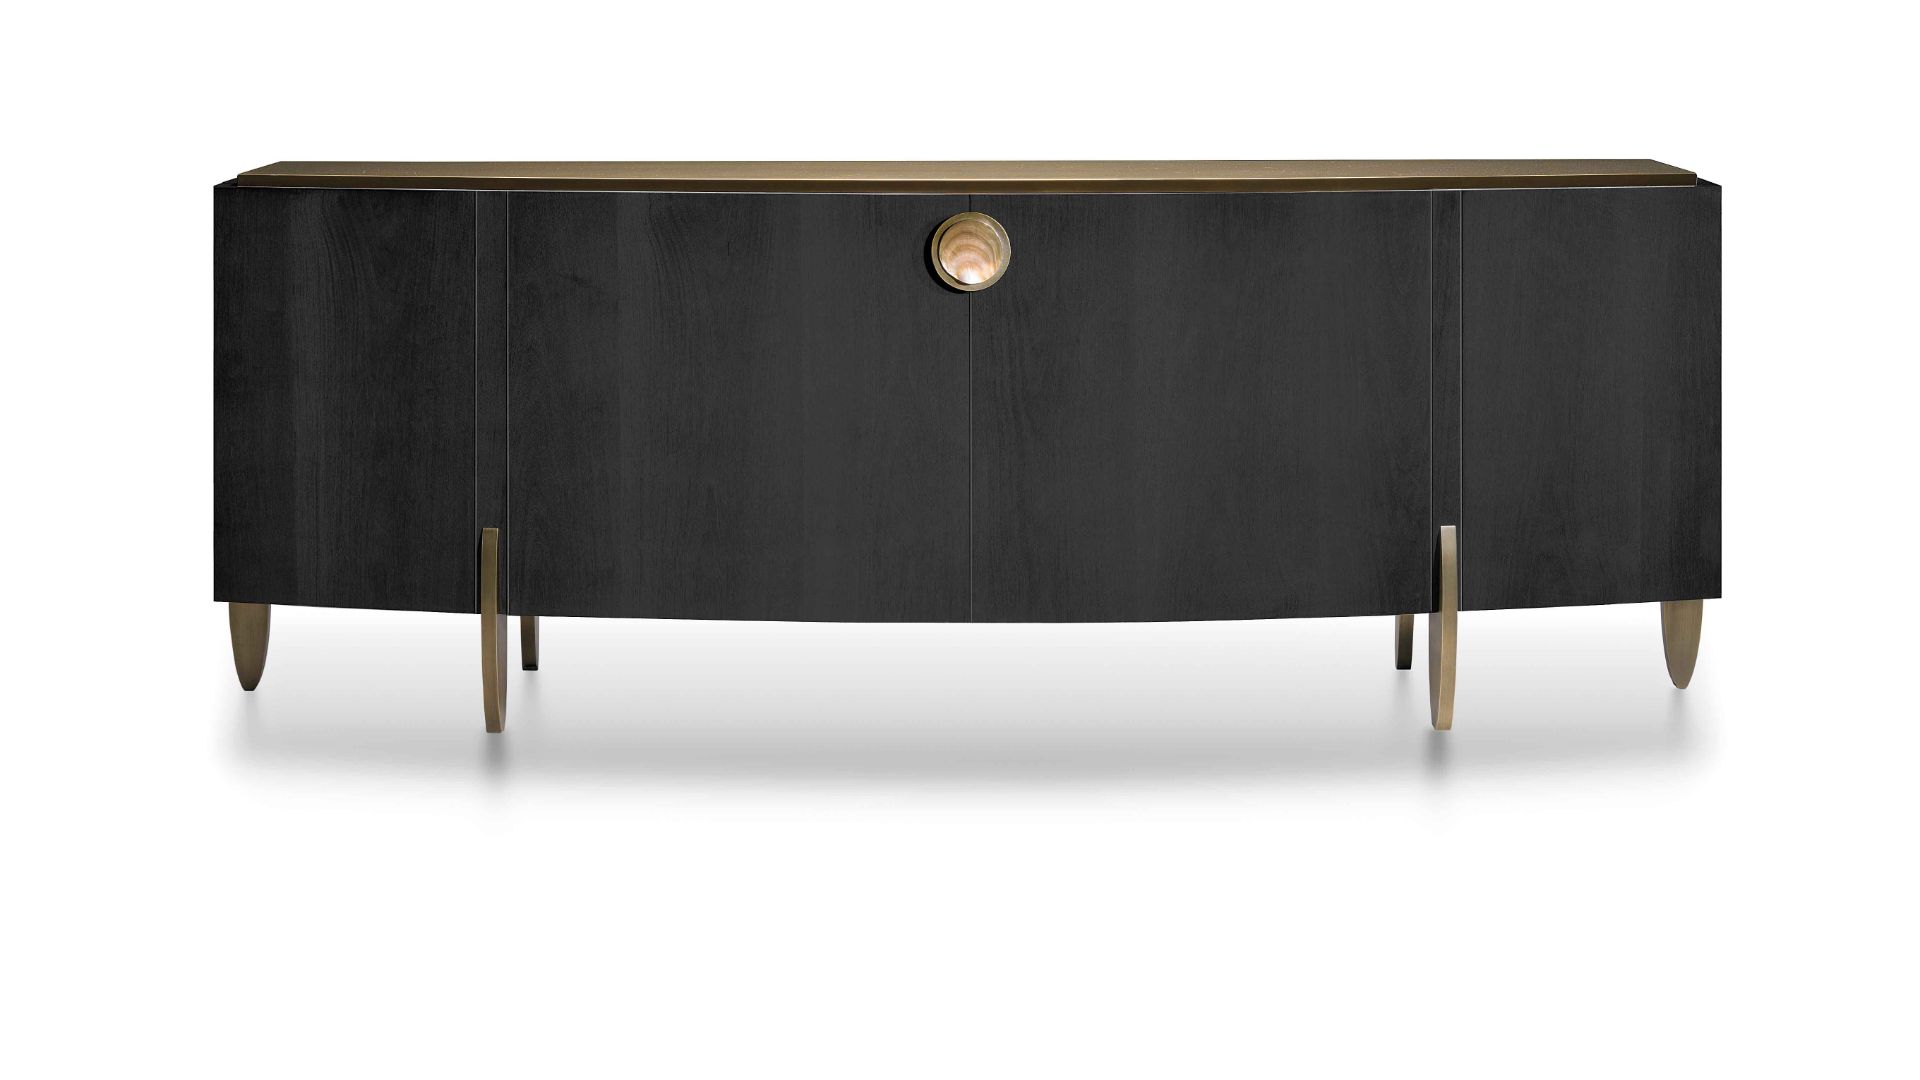 Fashion Affair Large Sideboard by Telemaco for Malerba The Buffet, for the living room, is shaped by - Image 5 of 25